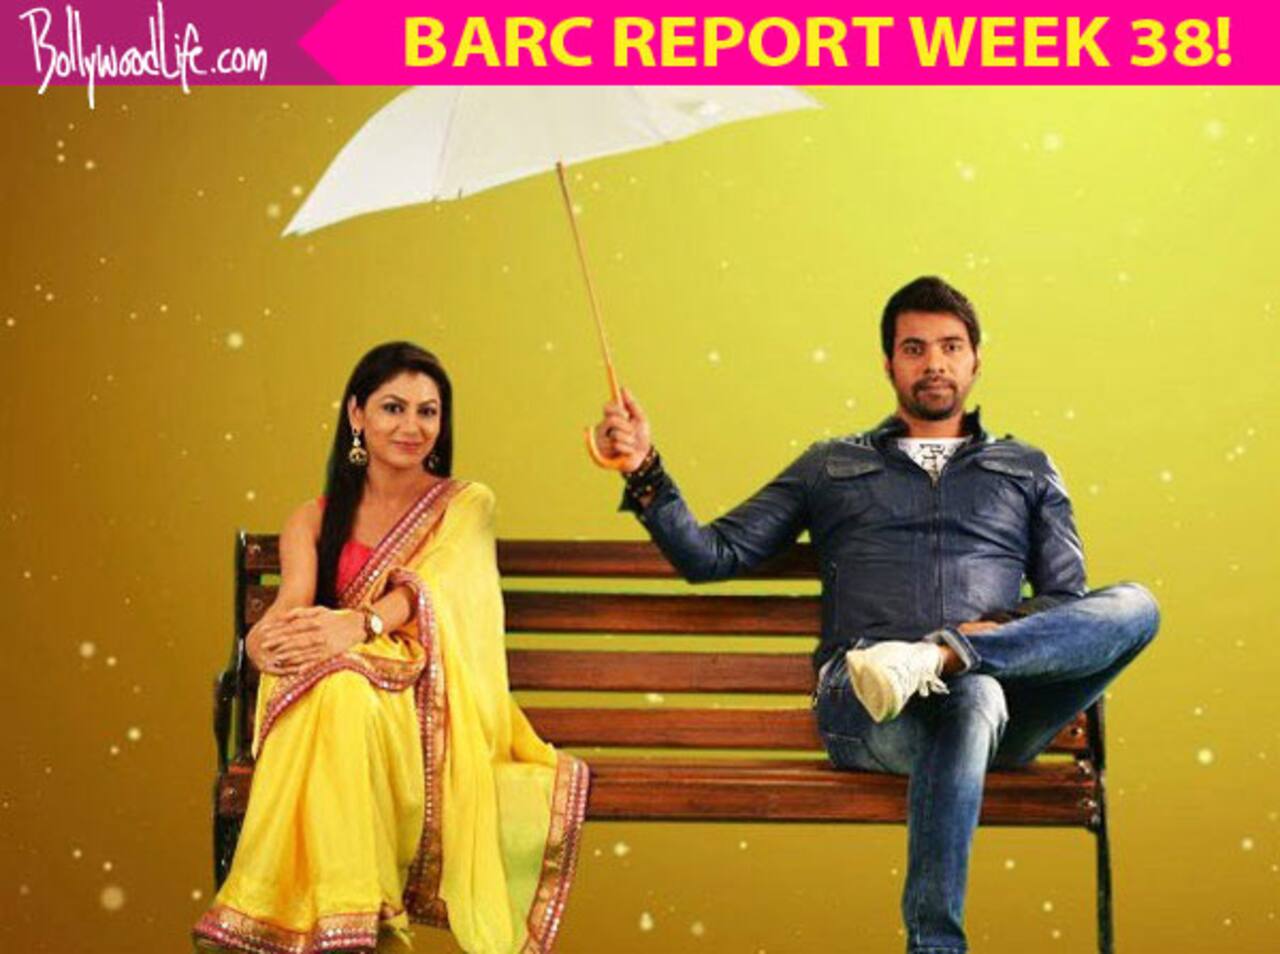 BARC Report Week 38: Kumkum Bhagya jumps back to the top position!